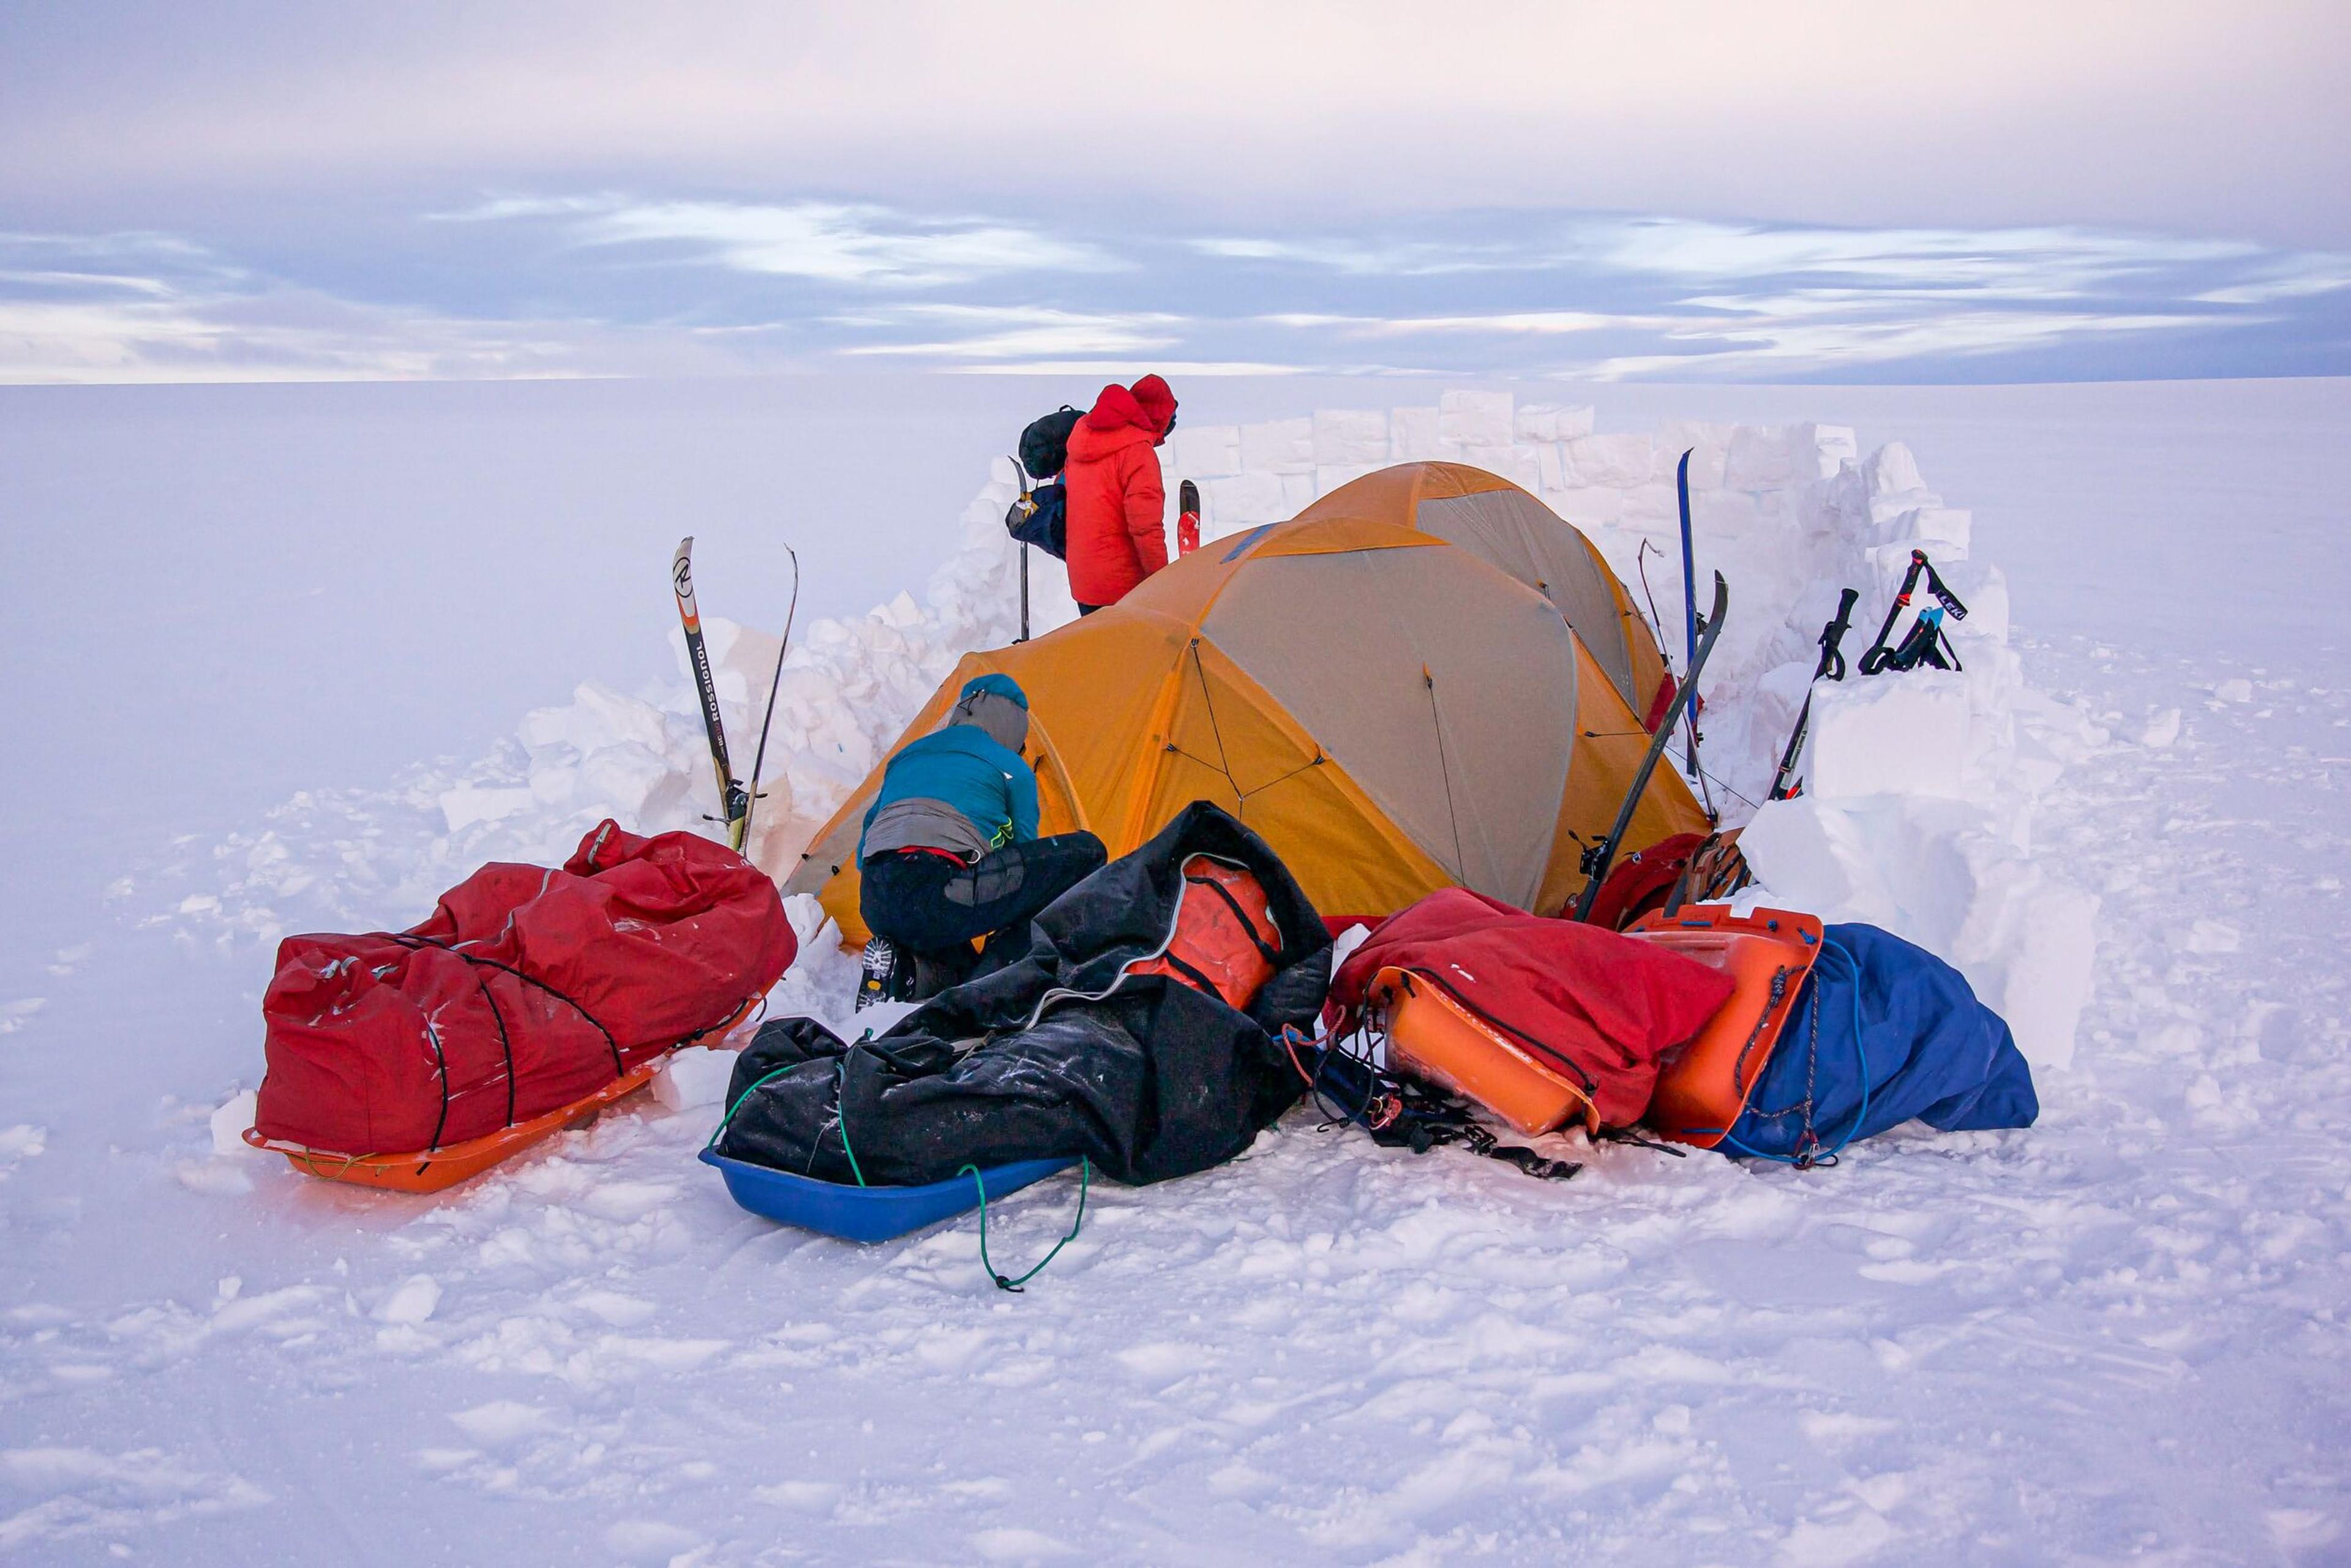 A campsite on a snowy expanse with a yellow tent surrounded by red and orange expedition gear and skis.